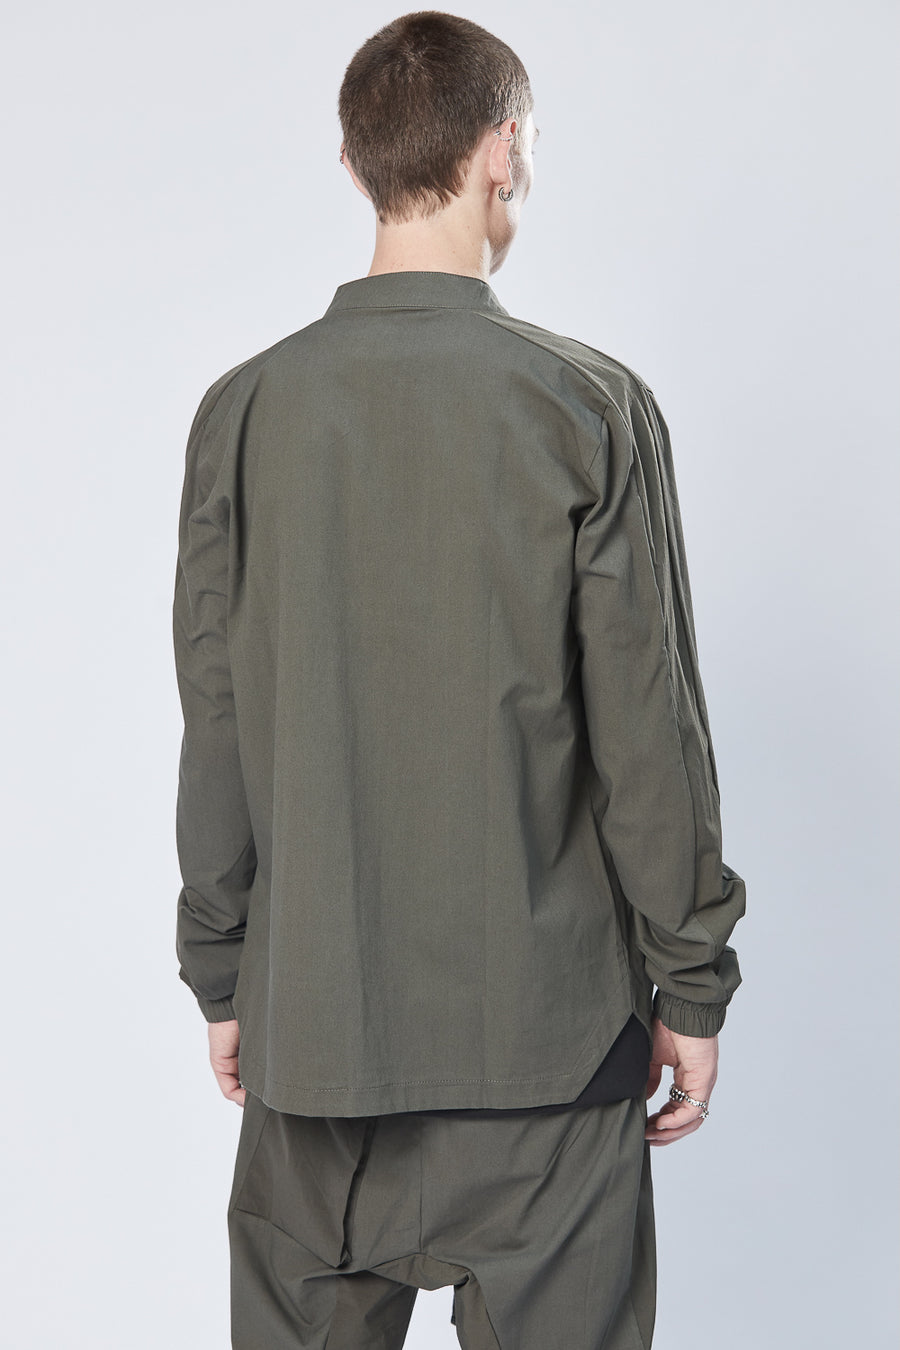 Buy the Thom Krom M H 151 Overshirt in Green at Intro. Spend £50 for free UK delivery. Official stockists. We ship worldwide.